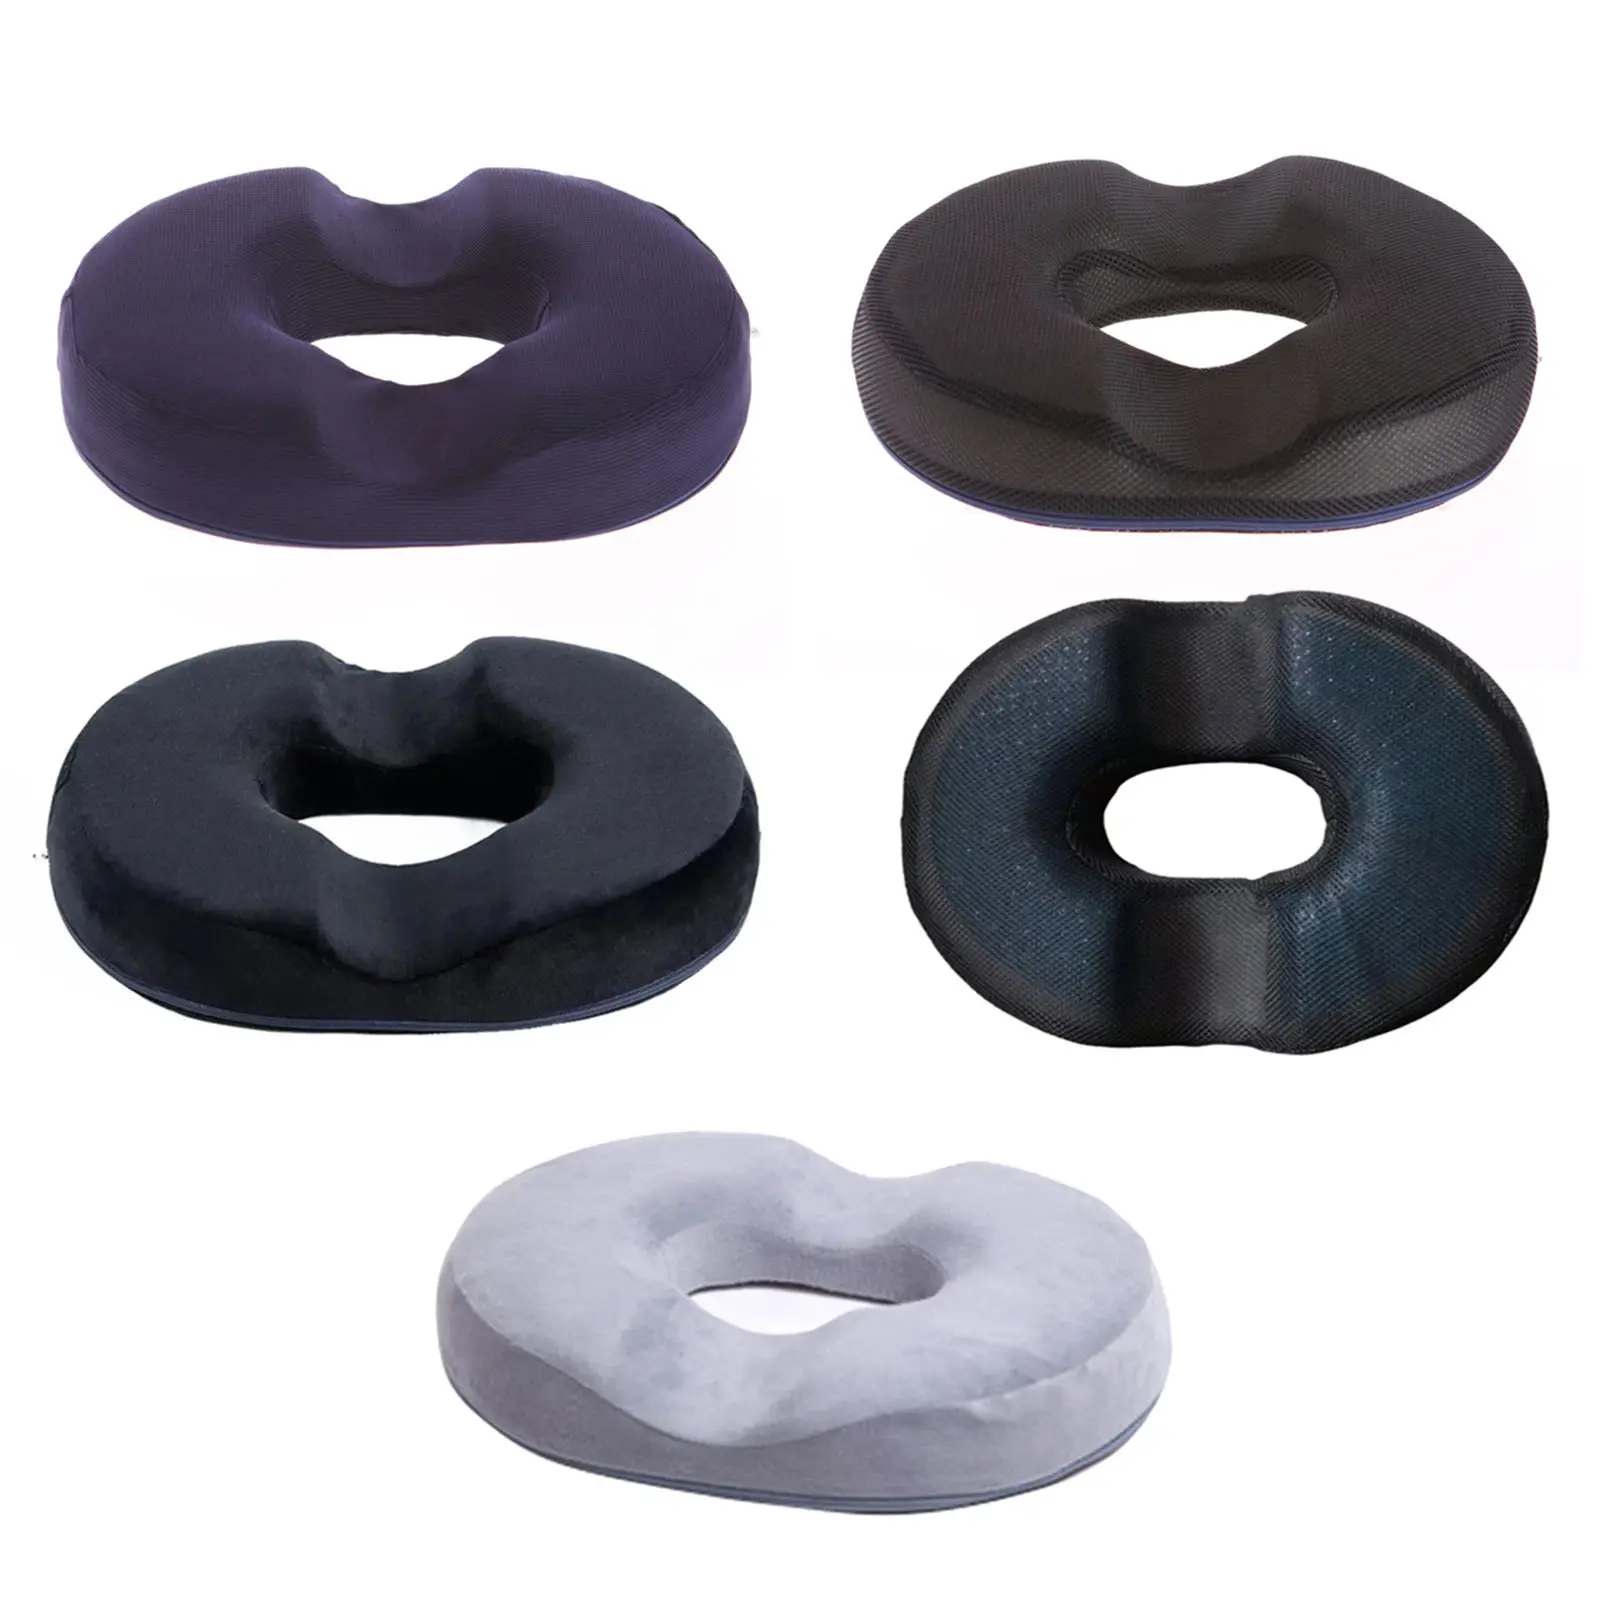 Donut Tailbone Pillow - Hemorrhoid Cushion, Donut Seat Cushion Pain Relief for Hemorrhoids, Bed Sores, Prostate, Coccyx, Sciatic